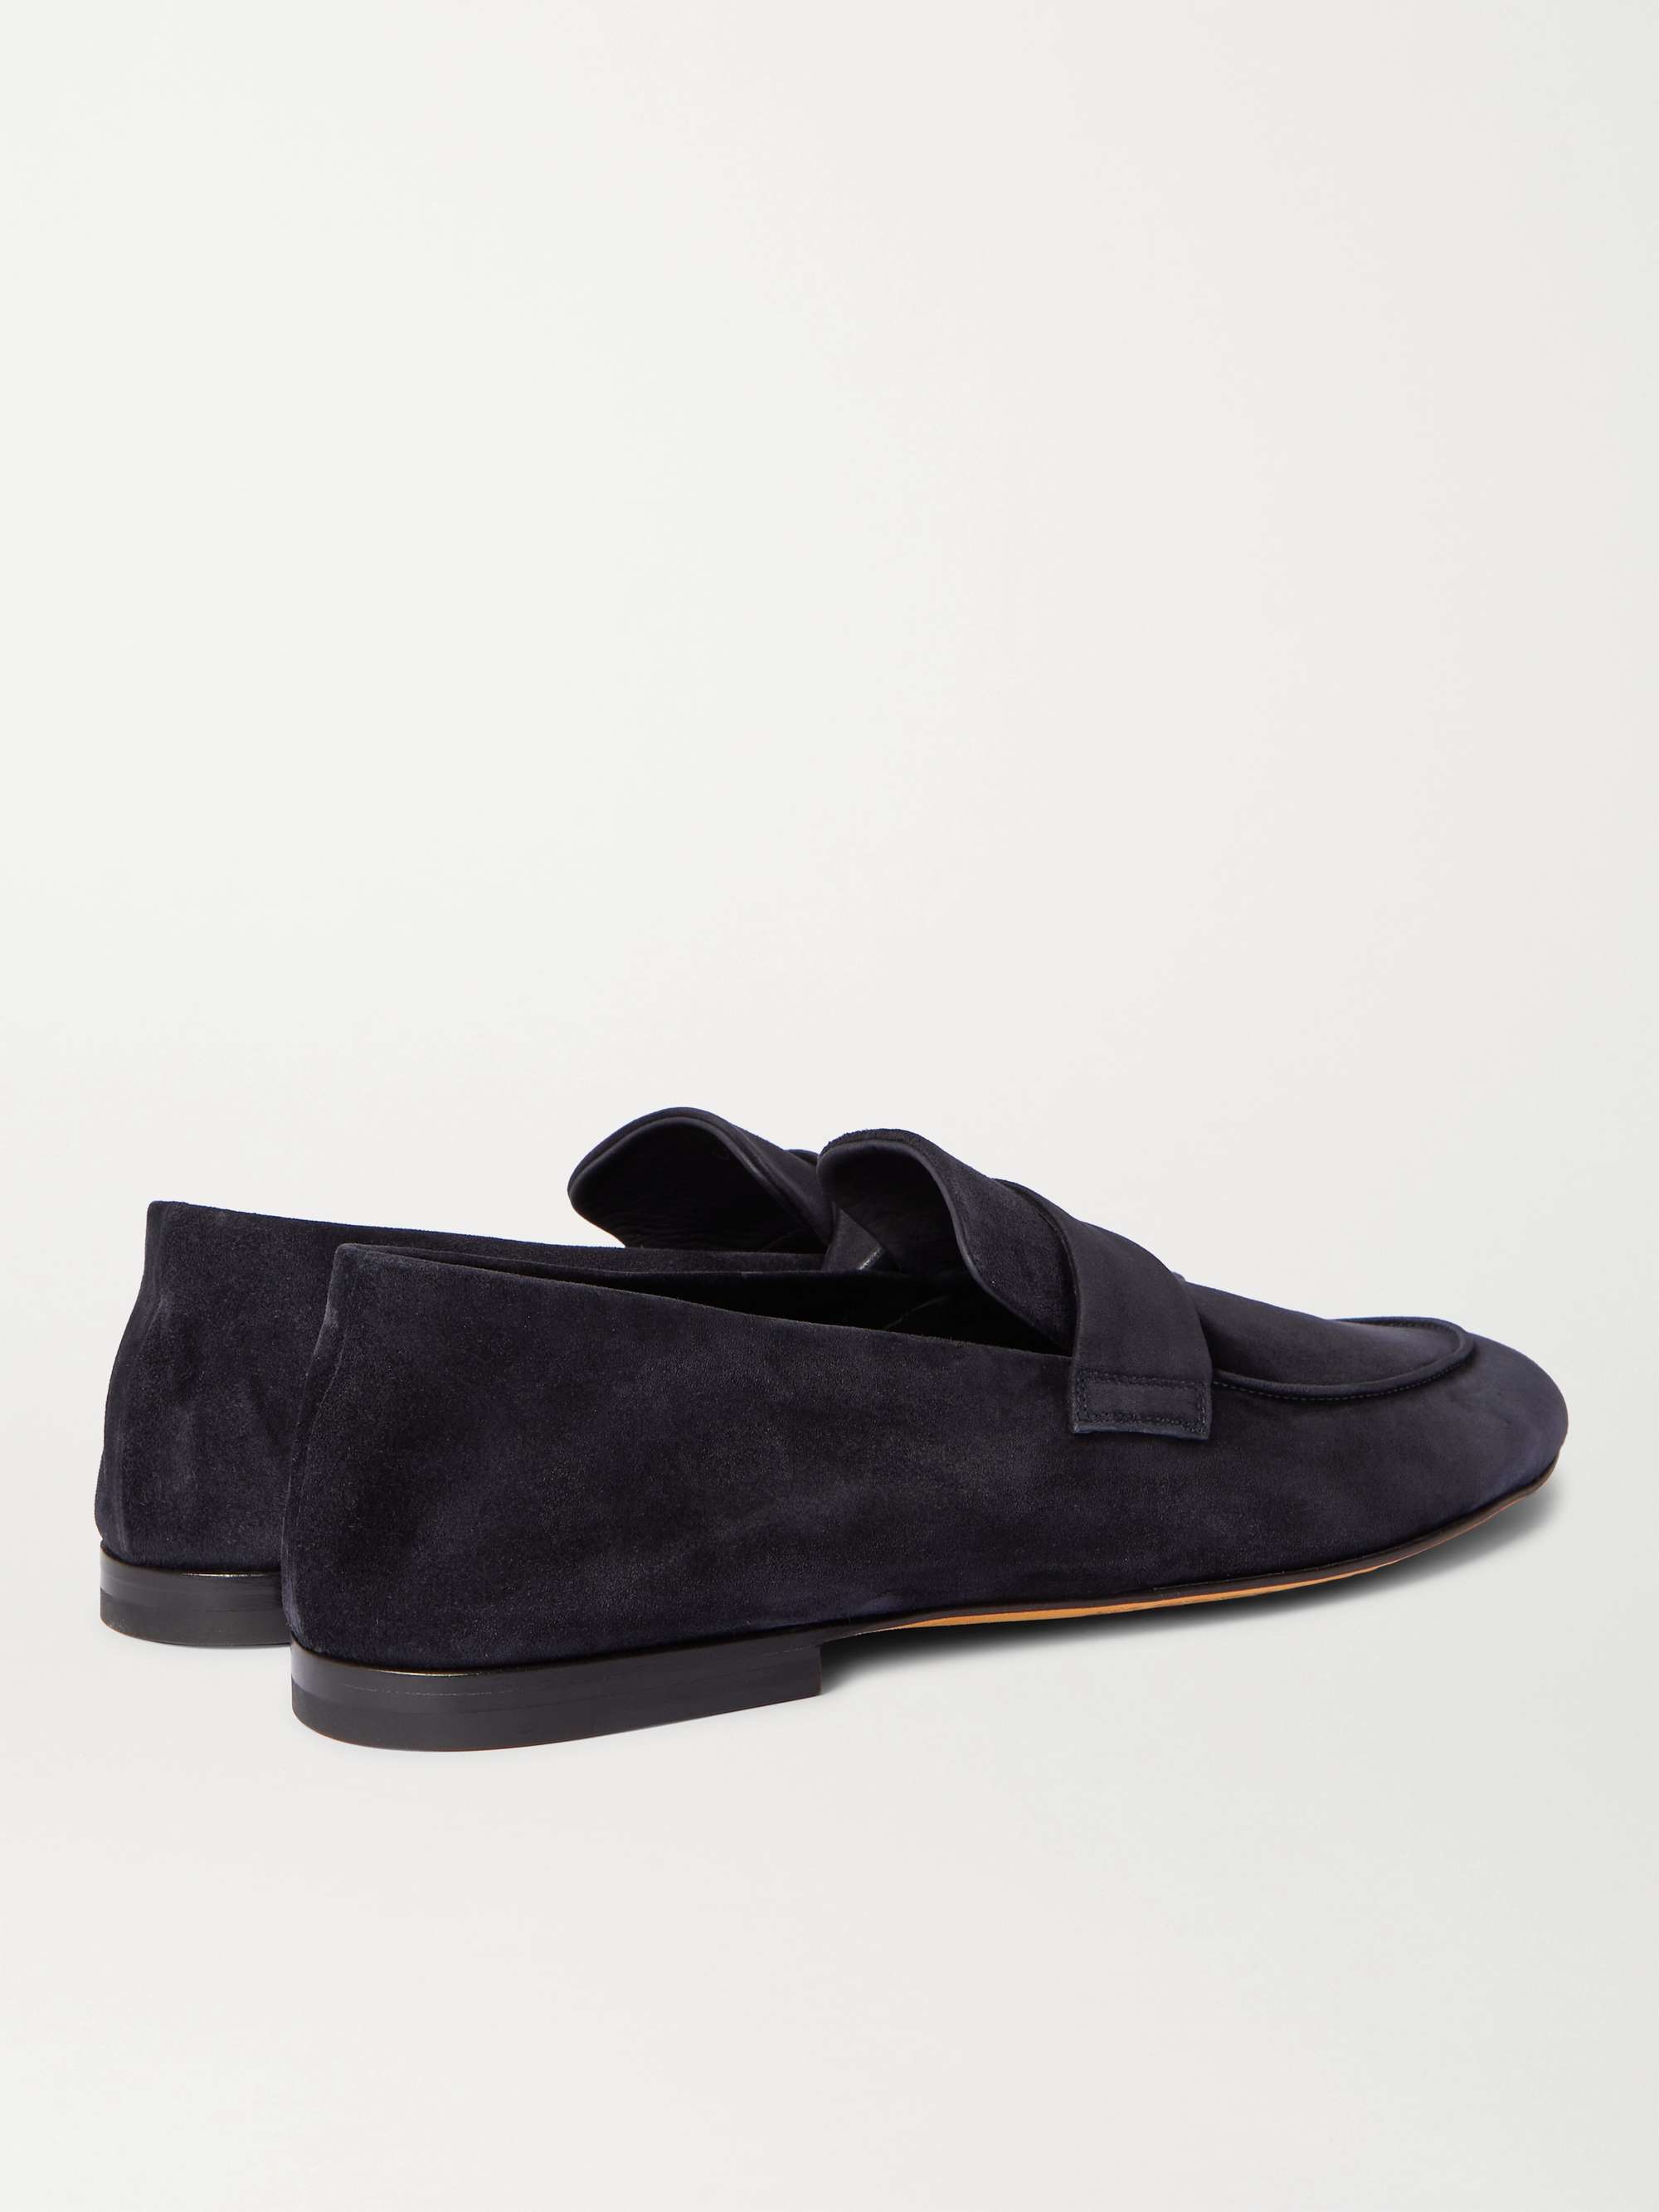 OFFICINE CREATIVE Airto Suede Loafers for Men | MR PORTER